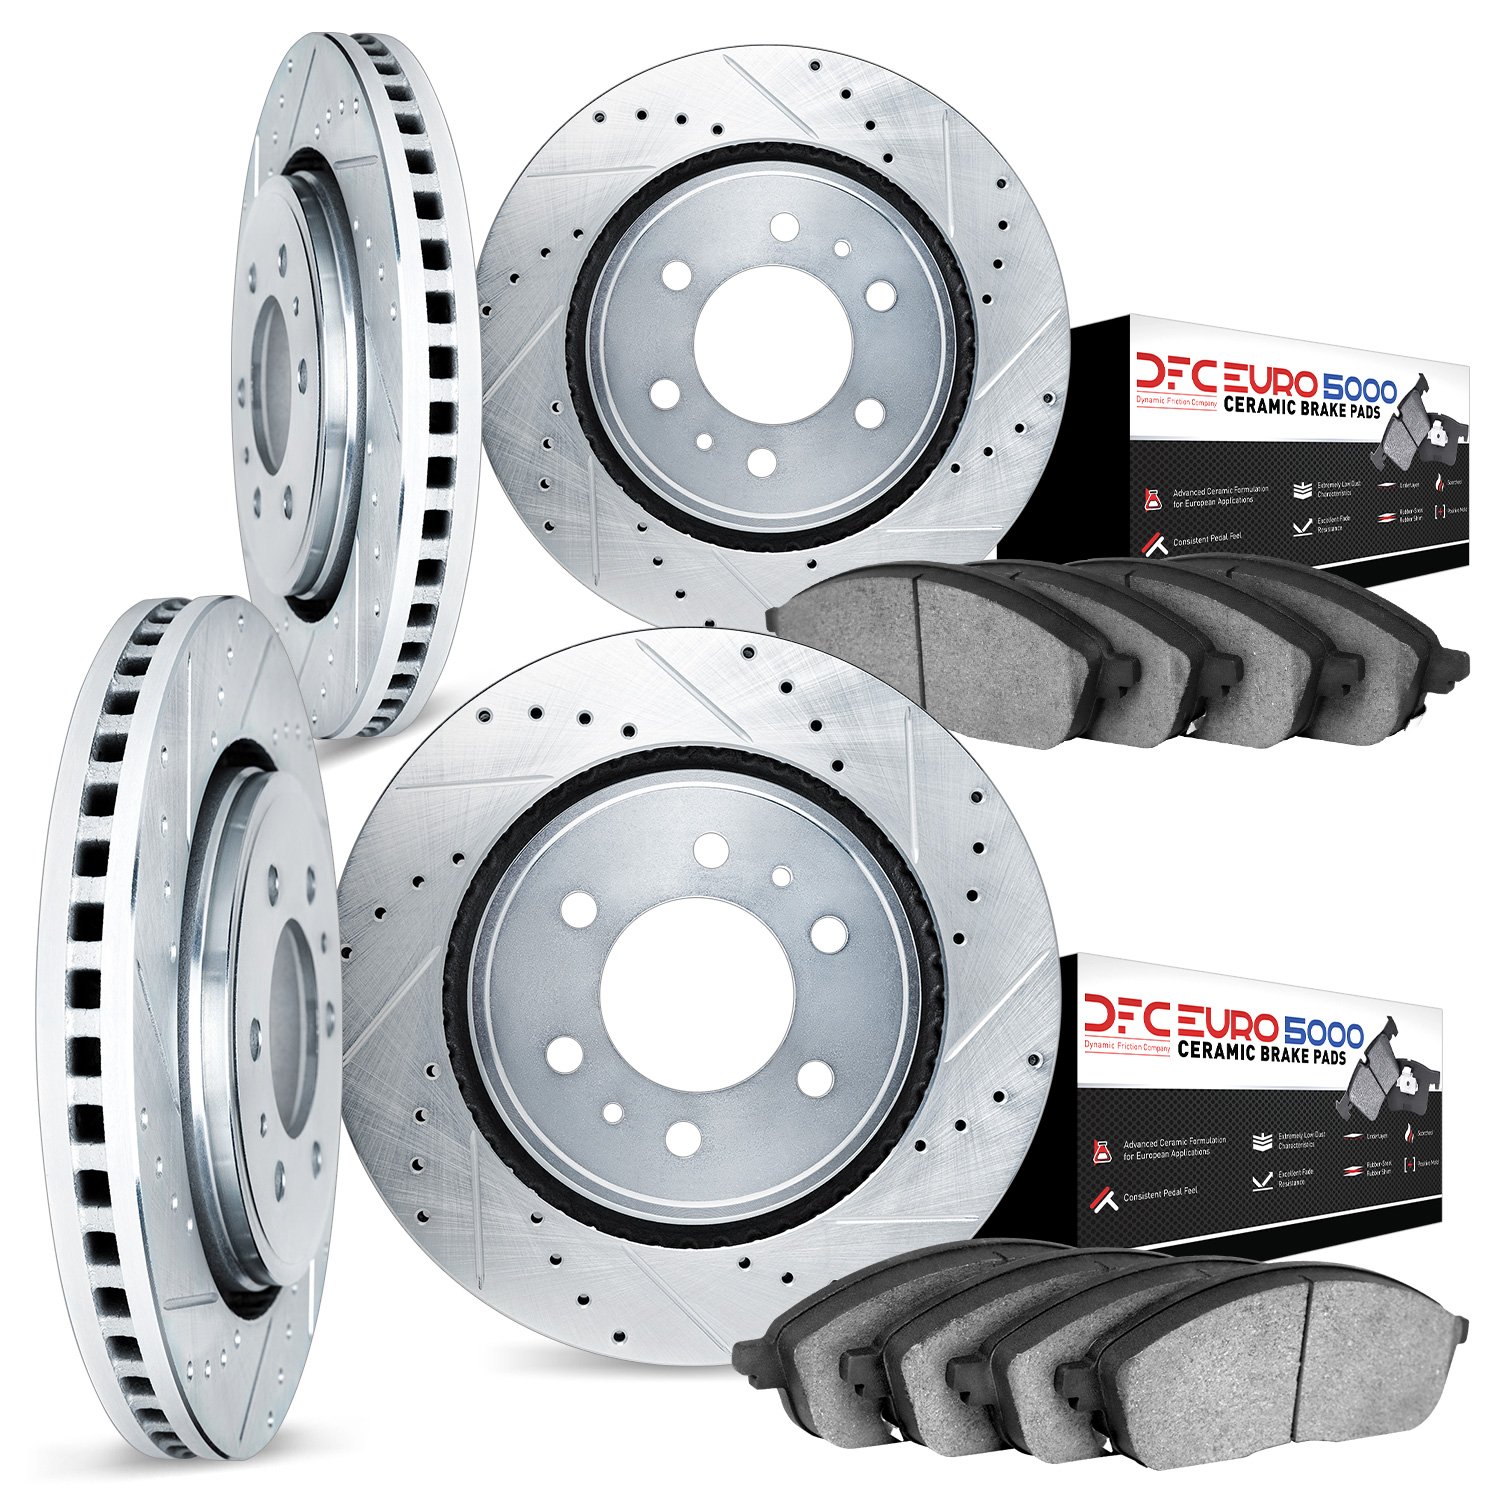 7604-47000 Drilled/Slotted Brake Rotors w/5000 Euro Ceramic Brake Pads Kit [Silver], 2006-2009 GM, Position: Front and Rear